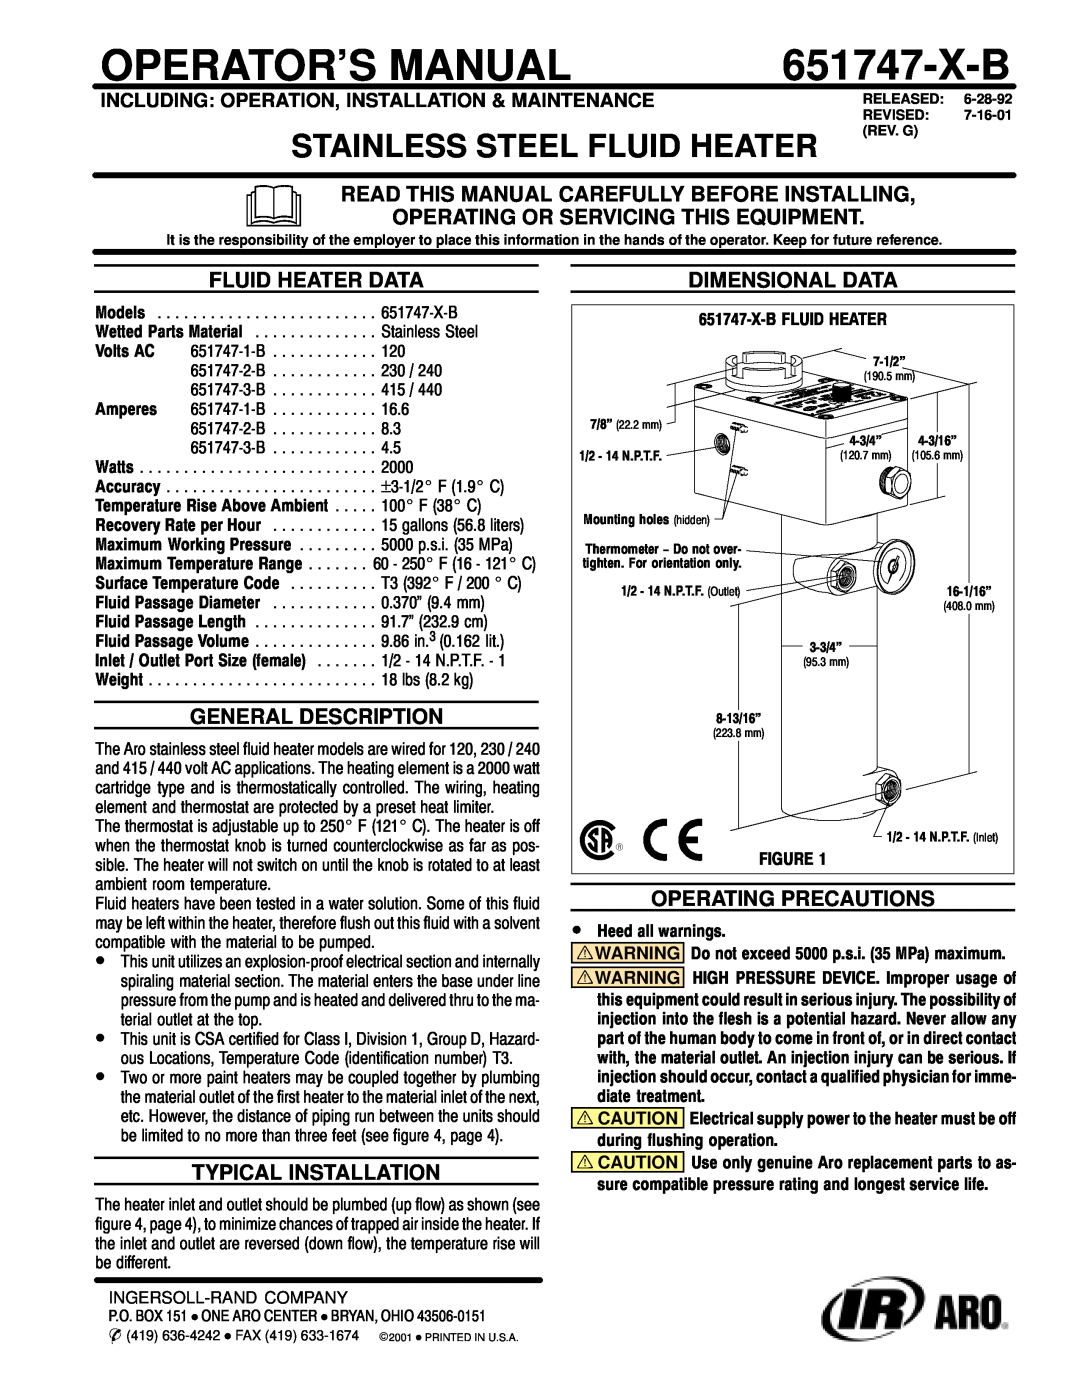 Ingersoll-Rand 651747-X-B manual Read This Manual Carefully Before Installing, Operating Or Servicing This Equipment 